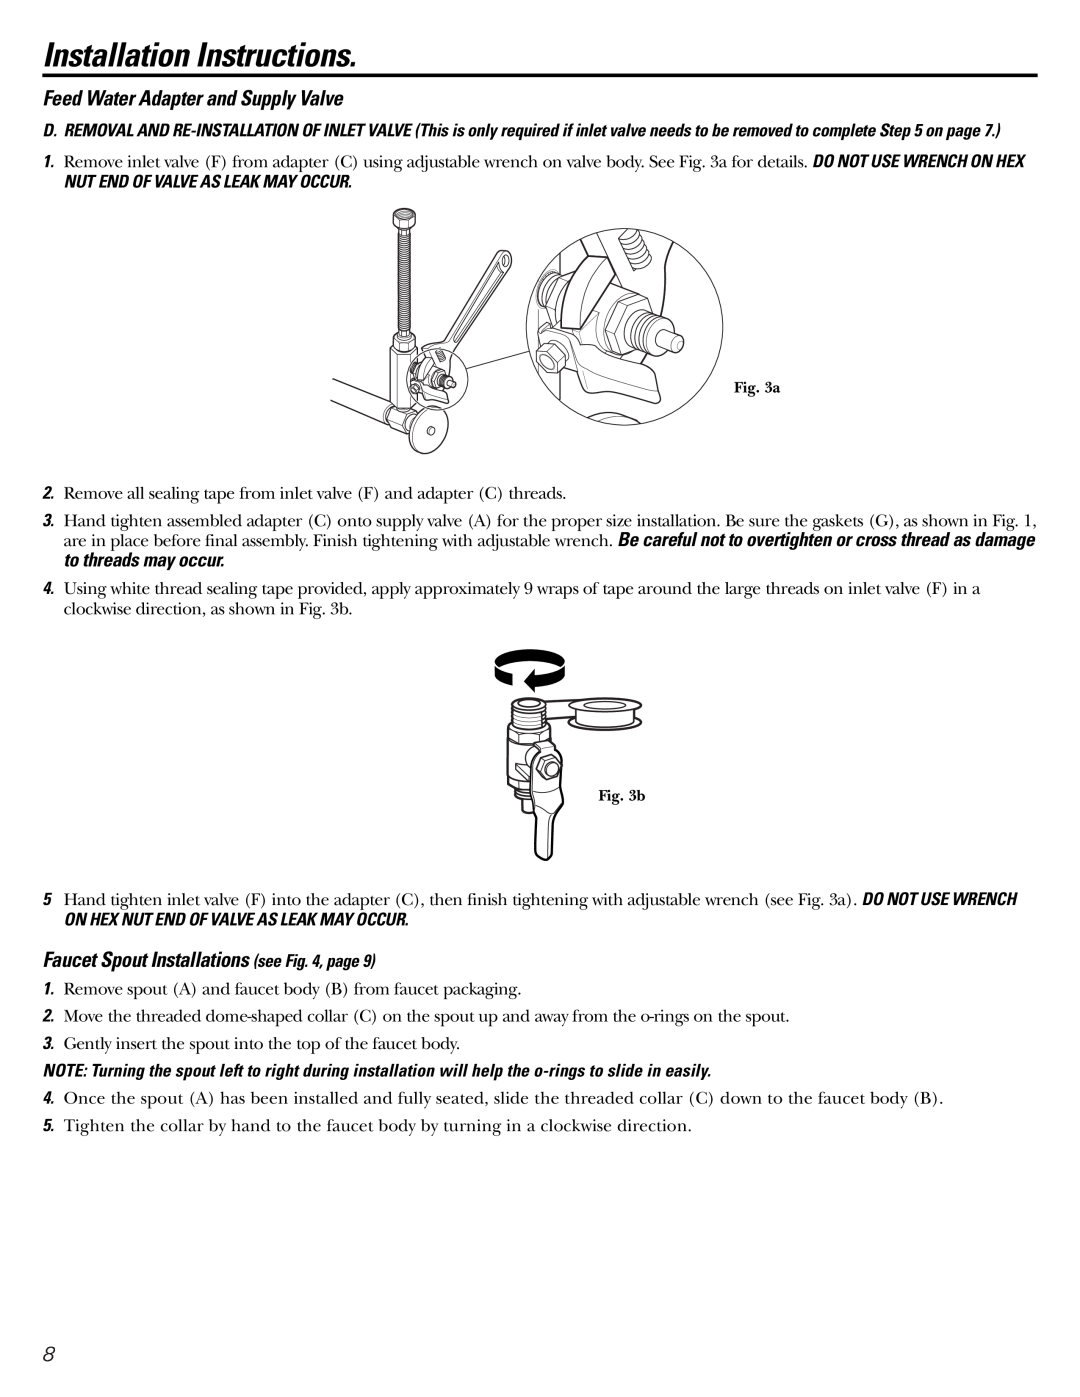 GE GNSV70FBL Faucet Spout Installations see , page, Installation Instructions, Feed Water Adapter and Supply Valve 